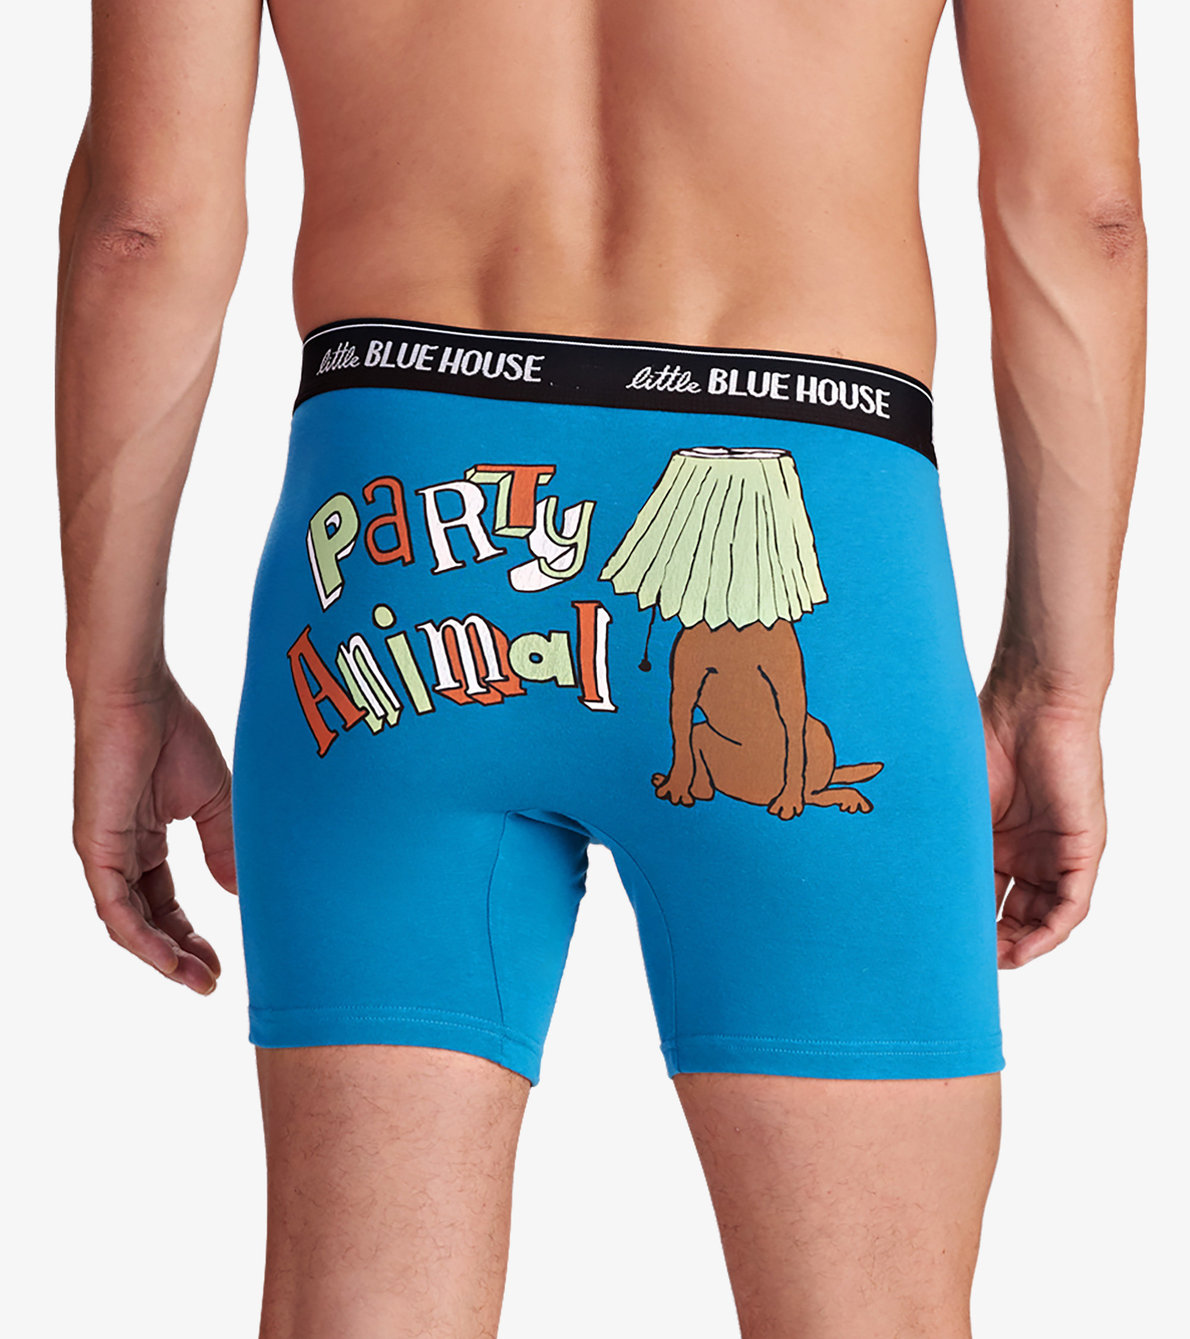 View larger image of Party Animal Men's Boxer Briefs